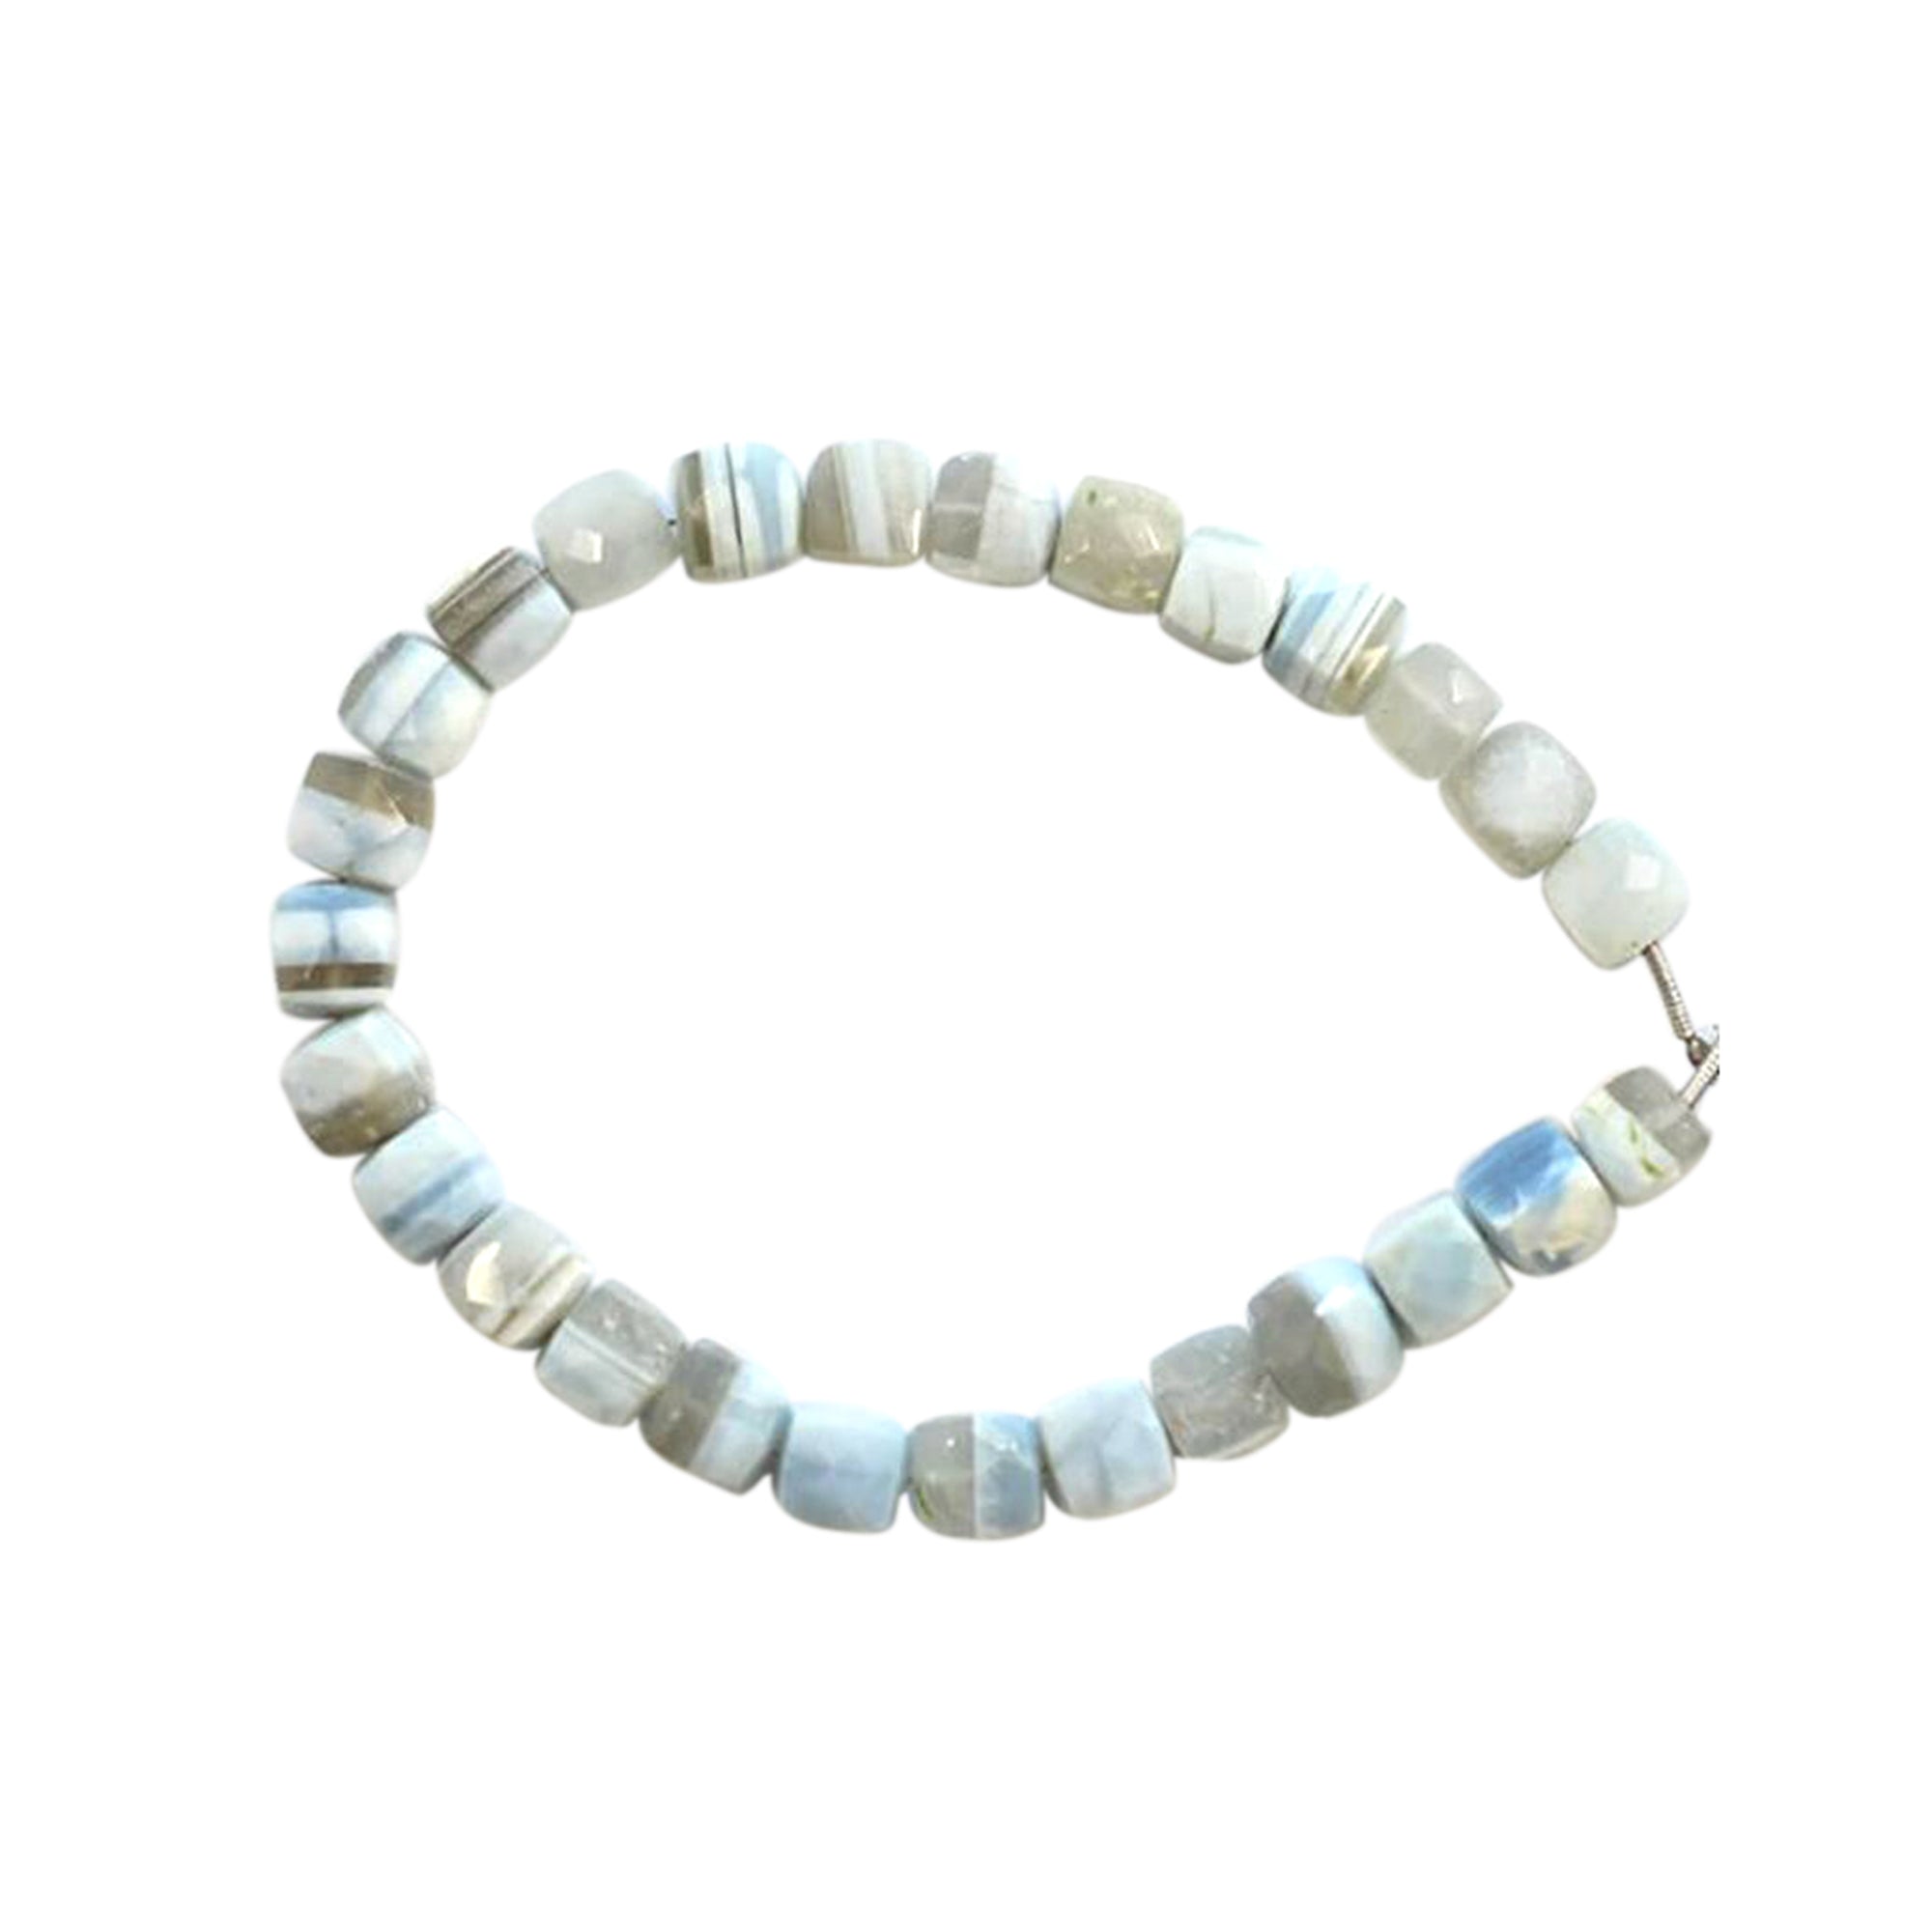 Blue Lace Agate 7 To 8 MM Faceted Cube Shape Beads Strand